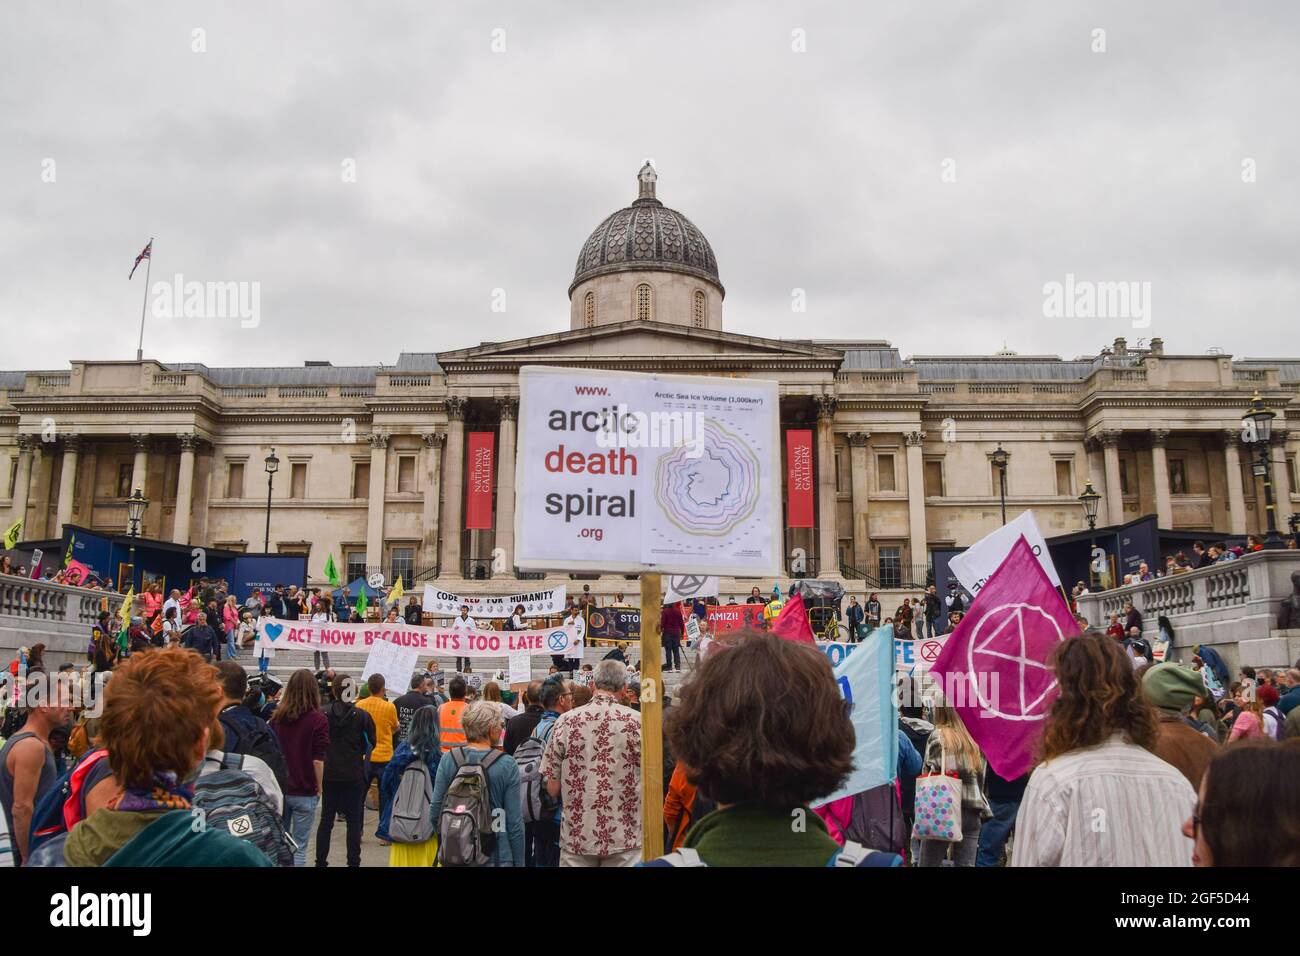 London, United Kingdom. 23rd August 2021. Extinction Rebellion protesters in Trafalgar Square at the start of their two-week campaign, Impossible Rebellion. (Credit: Vuk Valcic / Alamy Live News) Stock Photo